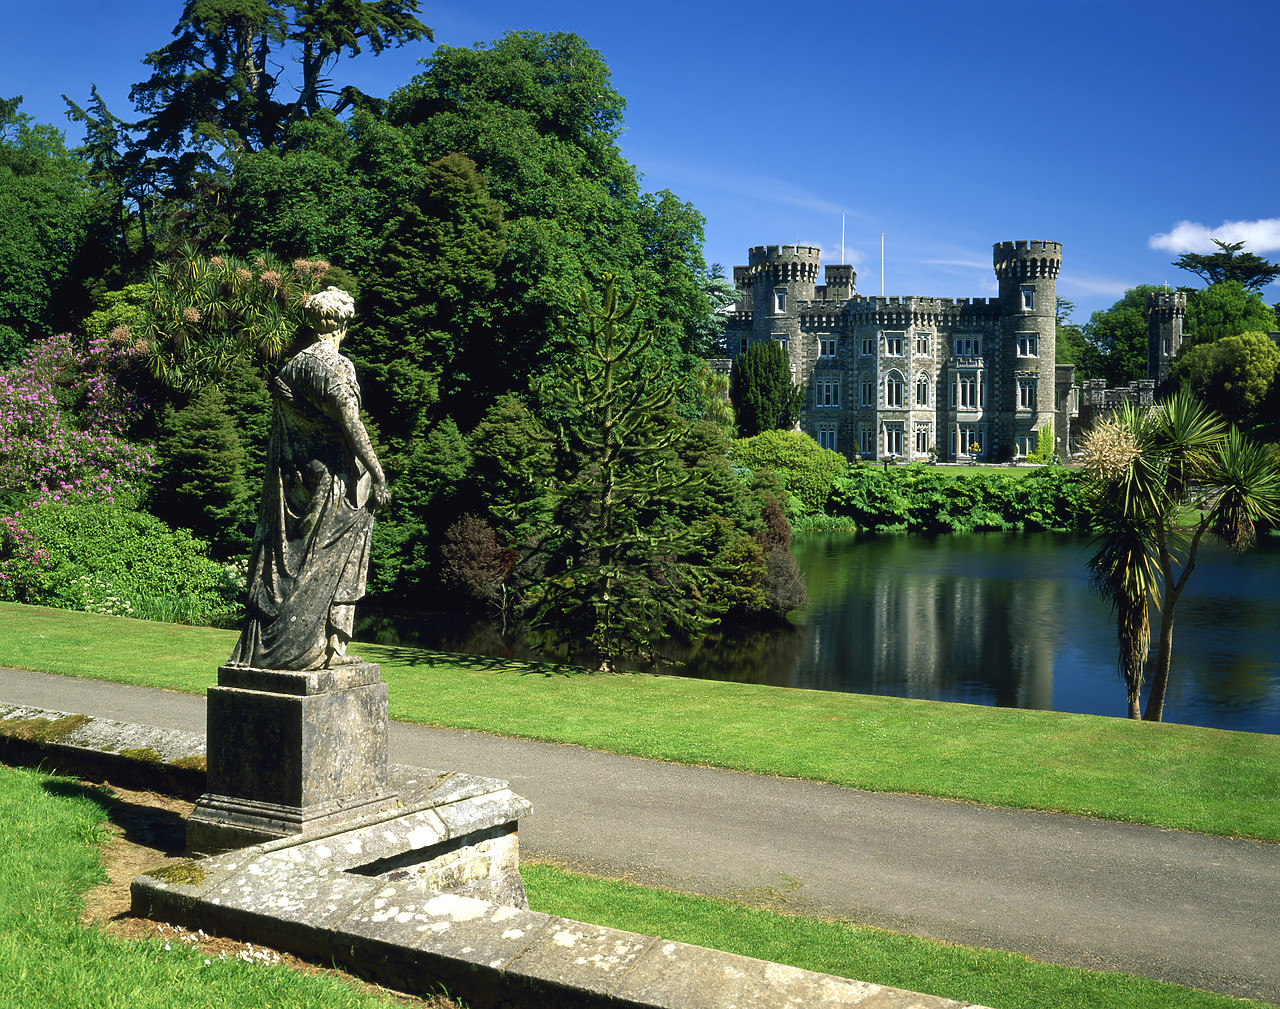 #990159-2 - Johnstown Castle, County Wexford, Southern Ireland